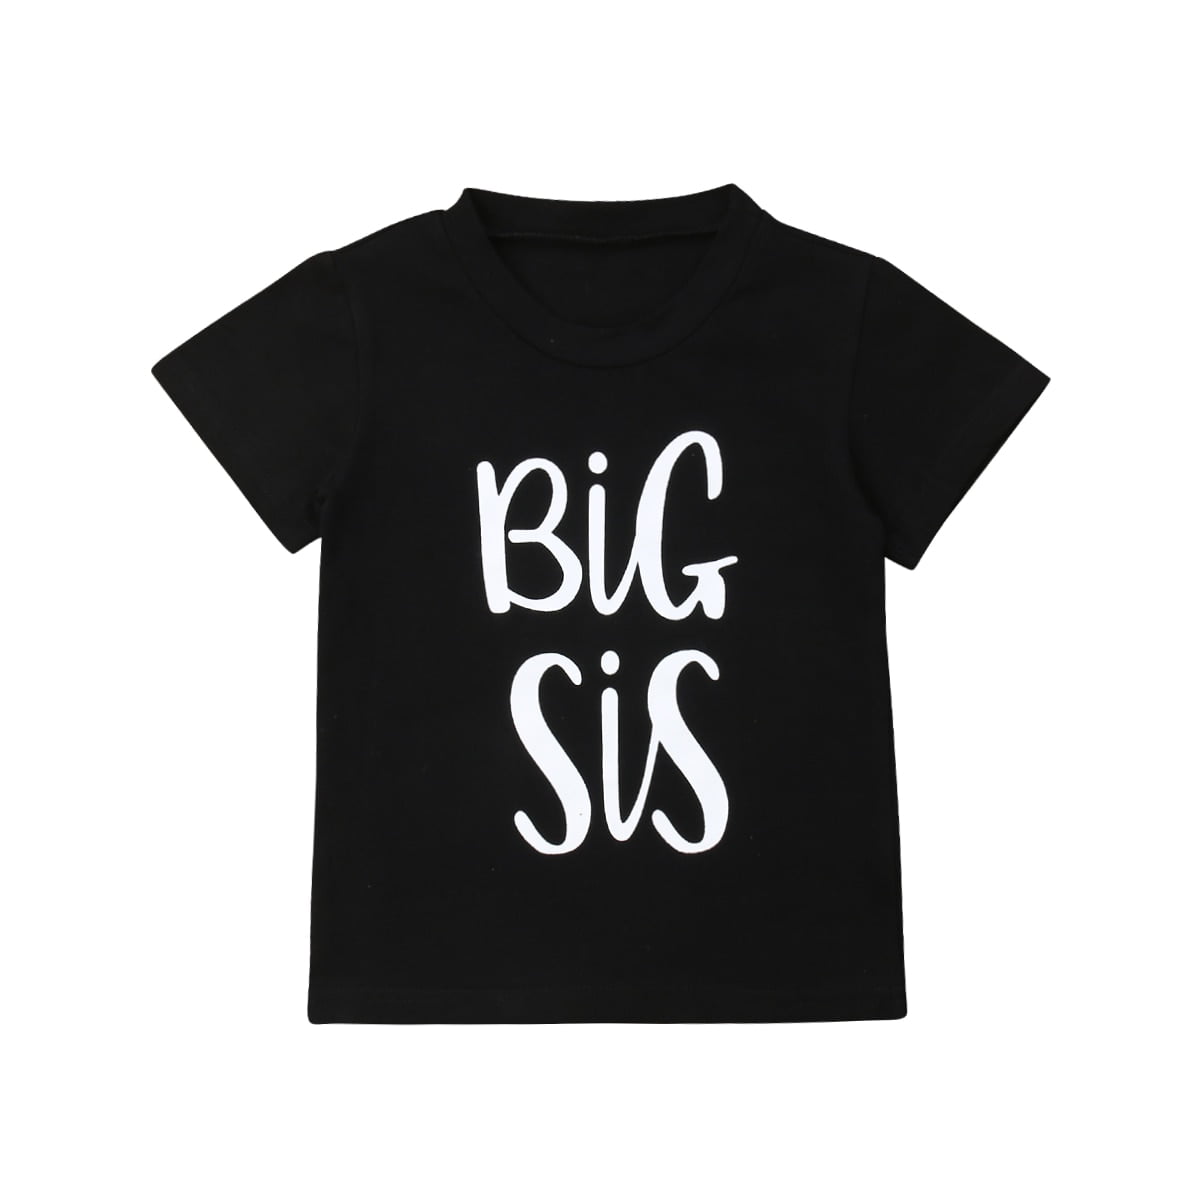 Big Sister Shirt Big Sis Little Sis Little Sister Shirt Sibling Shirts Baby Cowgirl Baby Girl Clothes Cowgirl Onesie